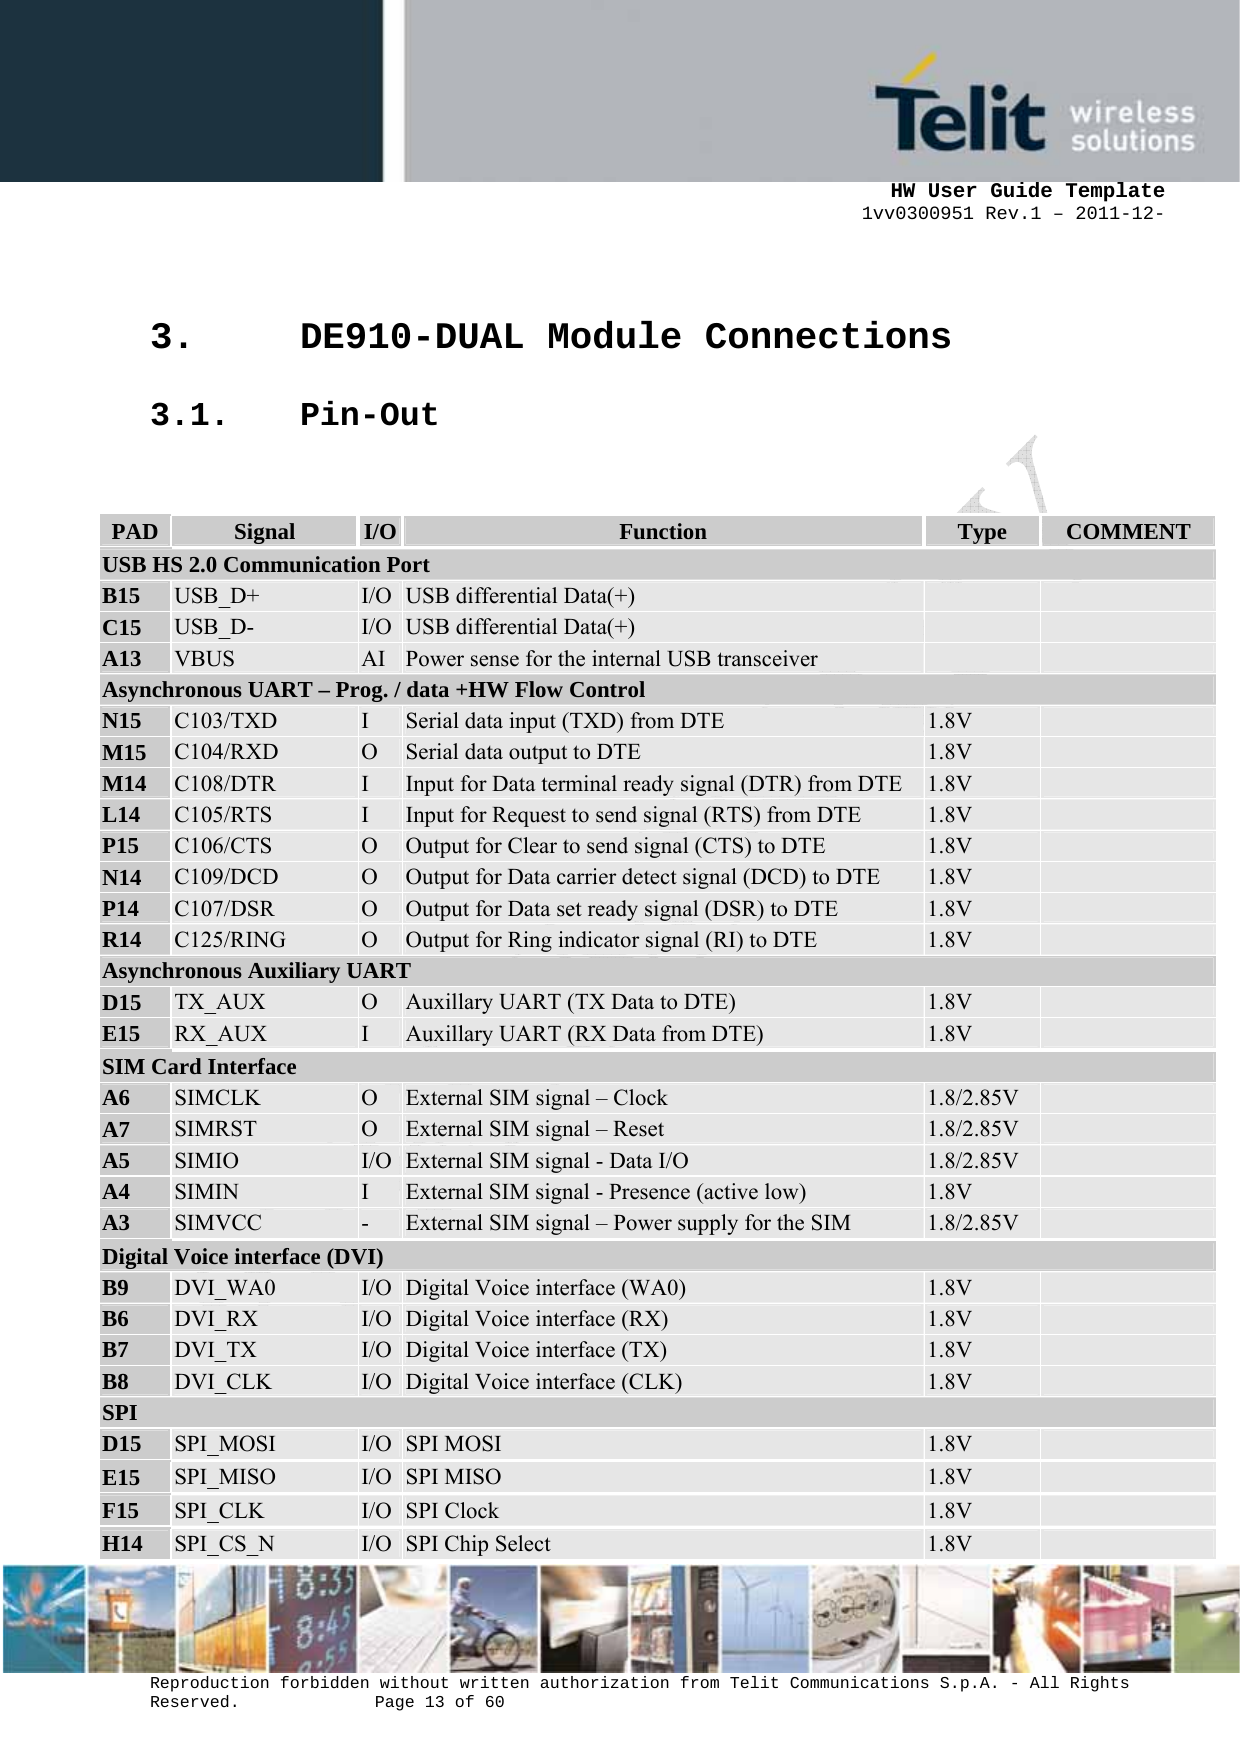      HW User Guide Template 1vv0300951 Rev.1 – 2011-12-  Reproduction forbidden without written authorization from Telit Communications S.p.A. - All Rights Reserved.    Page 13 of 60                                                     3. DE910-DUAL Module Connections 3.1. Pin-Out   PAD  Signal  I/O  Function  Type  COMMENT USB HS 2.0 Communication Port B15  USB_D+  I/O  USB differential Data(+)     C15  USB_D-  I/O  USB differential Data(+)     A13  VBUS  AI  Power sense for the internal USB transceiver     Asynchronous UART – Prog. / data +HW Flow Control N15  C103/TXD  I  Serial data input (TXD) from DTE  1.8V   M15  C104/RXD  O  Serial data output to DTE  1.8V   M14  C108/DTR  I  Input for Data terminal ready signal (DTR) from DTE  1.8V   L14  C105/RTS  I  Input for Request to send signal (RTS) from DTE  1.8V   P15  C106/CTS  O  Output for Clear to send signal (CTS) to DTE  1.8V   N14  C109/DCD  O  Output for Data carrier detect signal (DCD) to DTE  1.8V   P14  C107/DSR  O  Output for Data set ready signal (DSR) to DTE  1.8V   R14  C125/RING  O  Output for Ring indicator signal (RI) to DTE  1.8V   Asynchronous Auxiliary UART D15  TX_AUX  O  Auxillary UART (TX Data to DTE)  1.8V   E15  RX_AUX  I  Auxillary UART (RX Data from DTE)  1.8V   SIM Card Interface A6  SIMCLK  O  External SIM signal – Clock  1.8/2.85V   A7  SIMRST  O  External SIM signal – Reset  1.8/2.85V   A5  SIMIO  I/O  External SIM signal - Data I/O  1.8/2.85V   A4  SIMIN  I  External SIM signal - Presence (active low)  1.8V   A3  SIMVCC  -  External SIM signal – Power supply for the SIM  1.8/2.85V   Digital Voice interface (DVI) B9  DVI_WA0  I/O  Digital Voice interface (WA0)  1.8V   B6  DVI_RX  I/O  Digital Voice interface (RX)  1.8V   B7  DVI_TX  I/O  Digital Voice interface (TX)  1.8V   B8  DVI_CLK  I/O  Digital Voice interface (CLK)  1.8V   SPI D15  SPI_MOSI  I/O  SPI MOSI  1.8V   E15  SPI_MISO  I/O  SPI MISO  1.8V   F15  SPI_CLK  I/O  SPI Clock  1.8V   H14  SPI_CS_N  I/O  SPI Chip Select  1.8V   